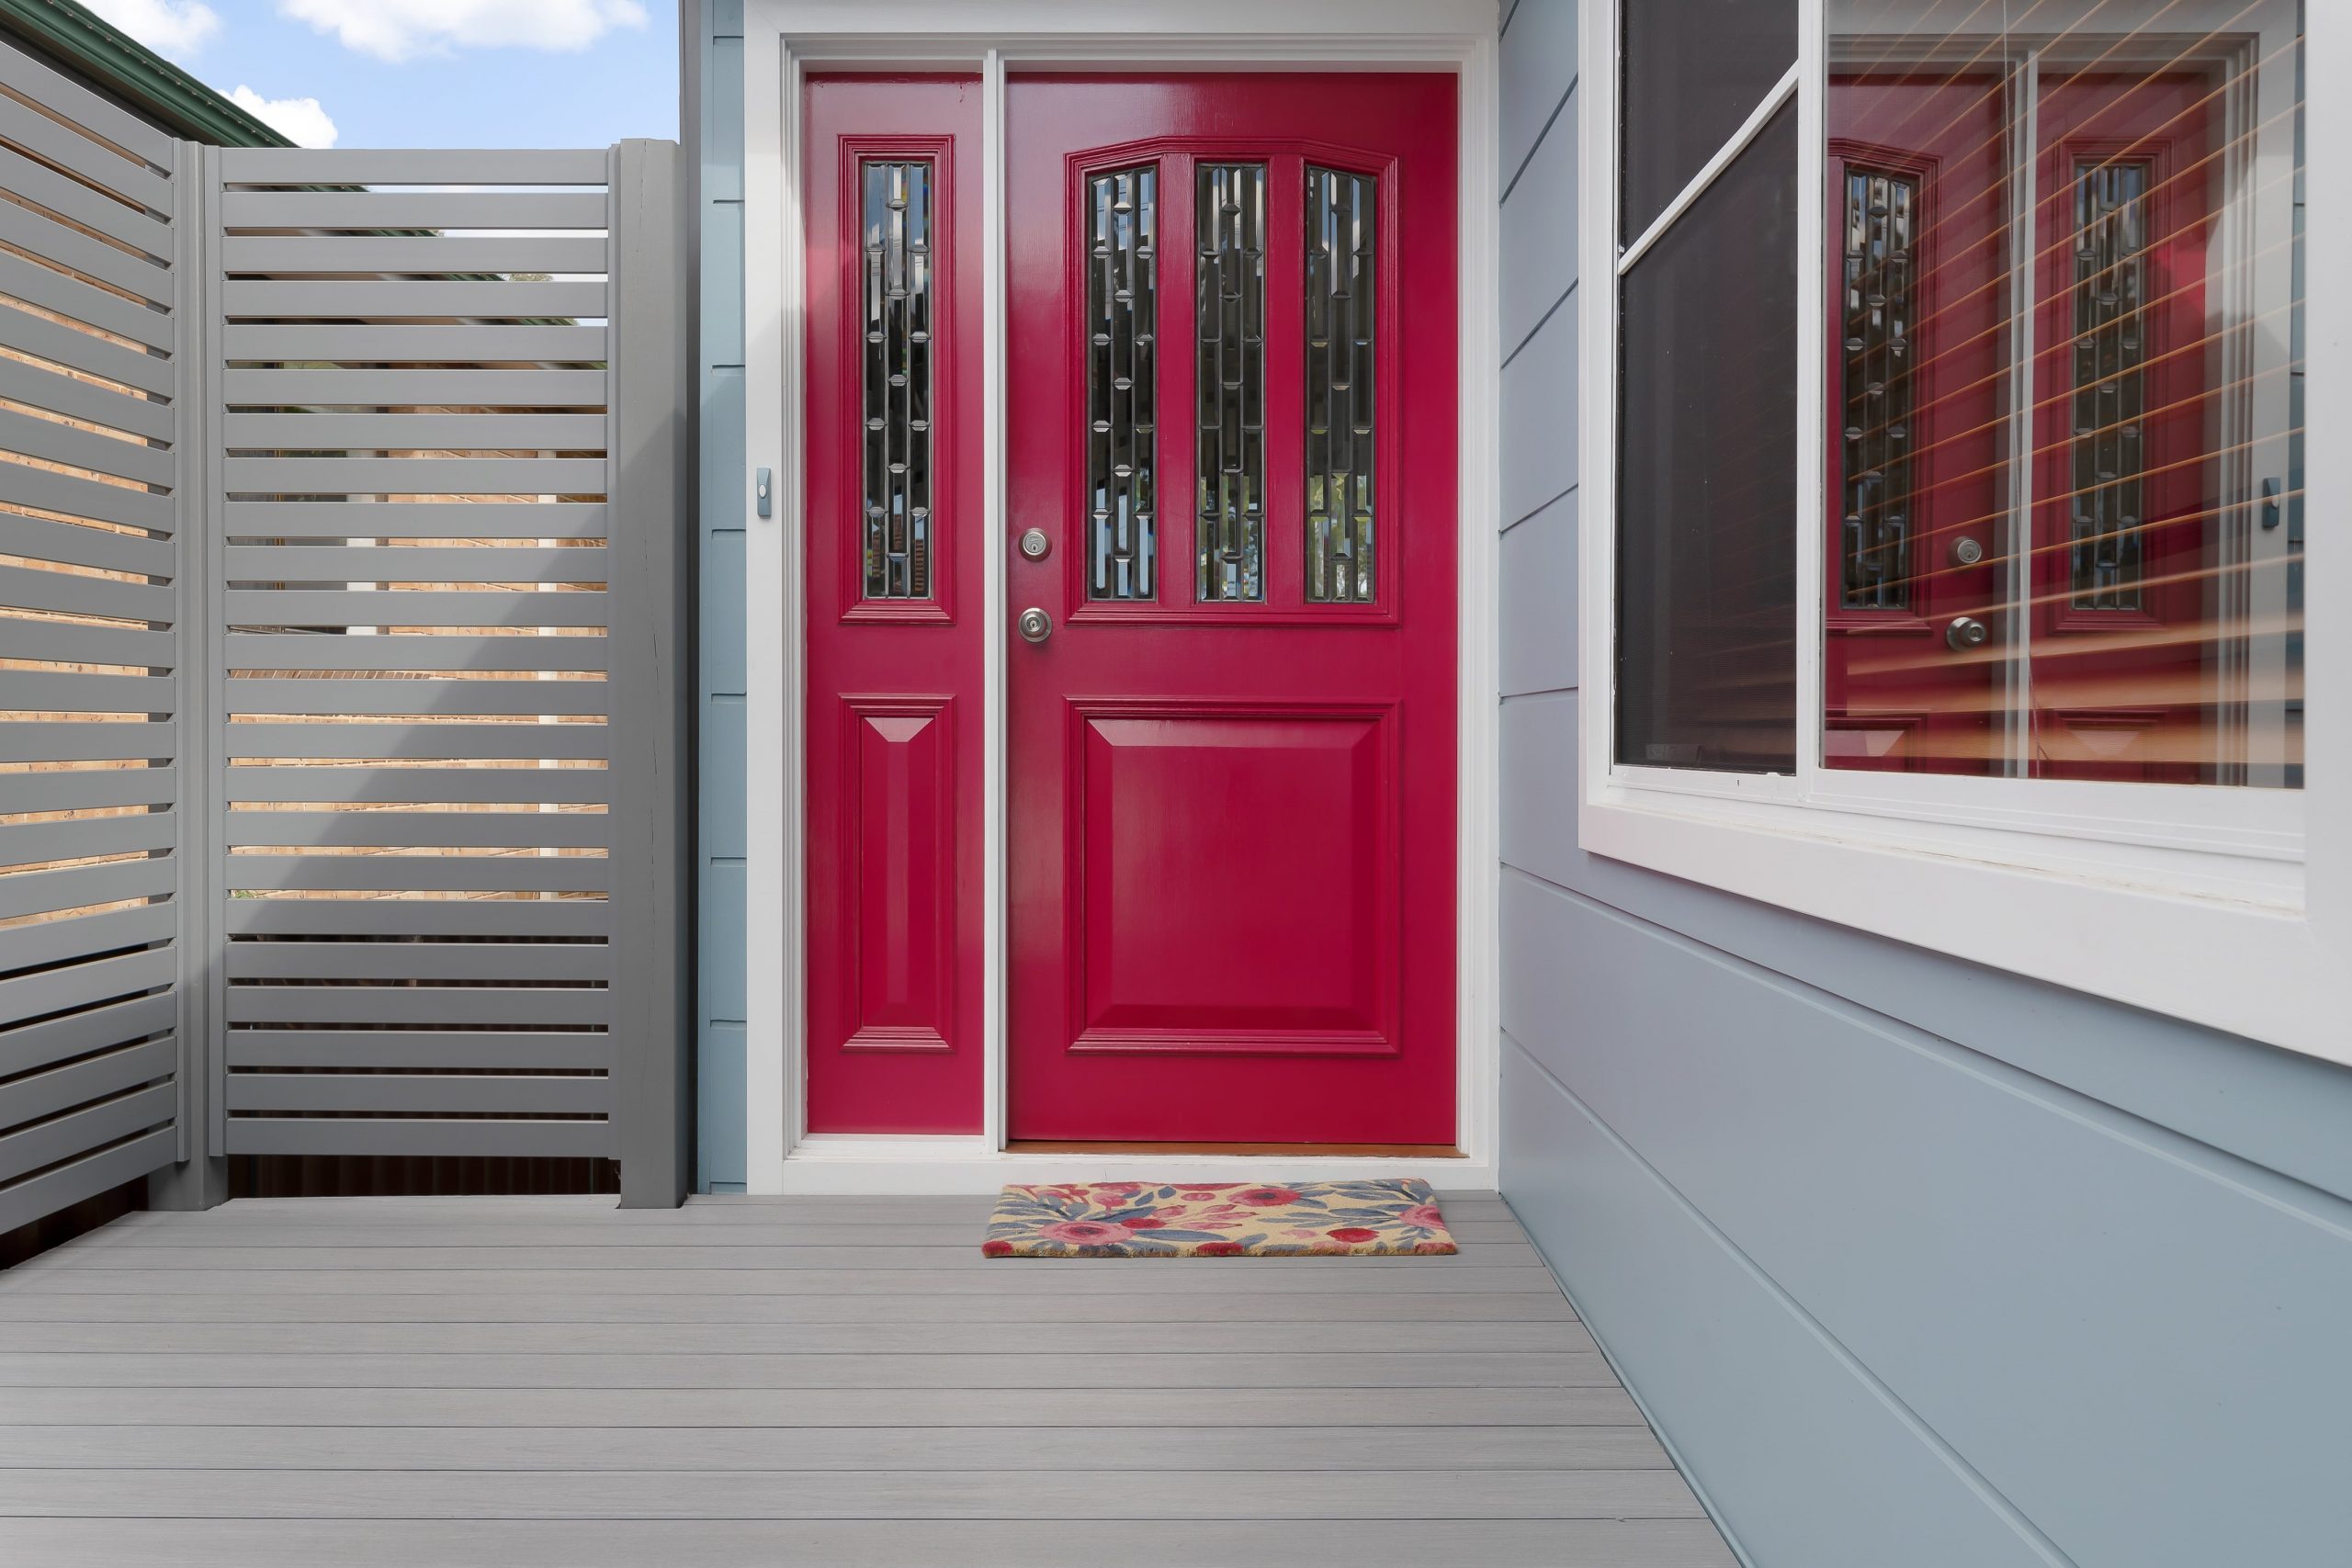 Mountain Ash composite decking boards leading up to a bright red door